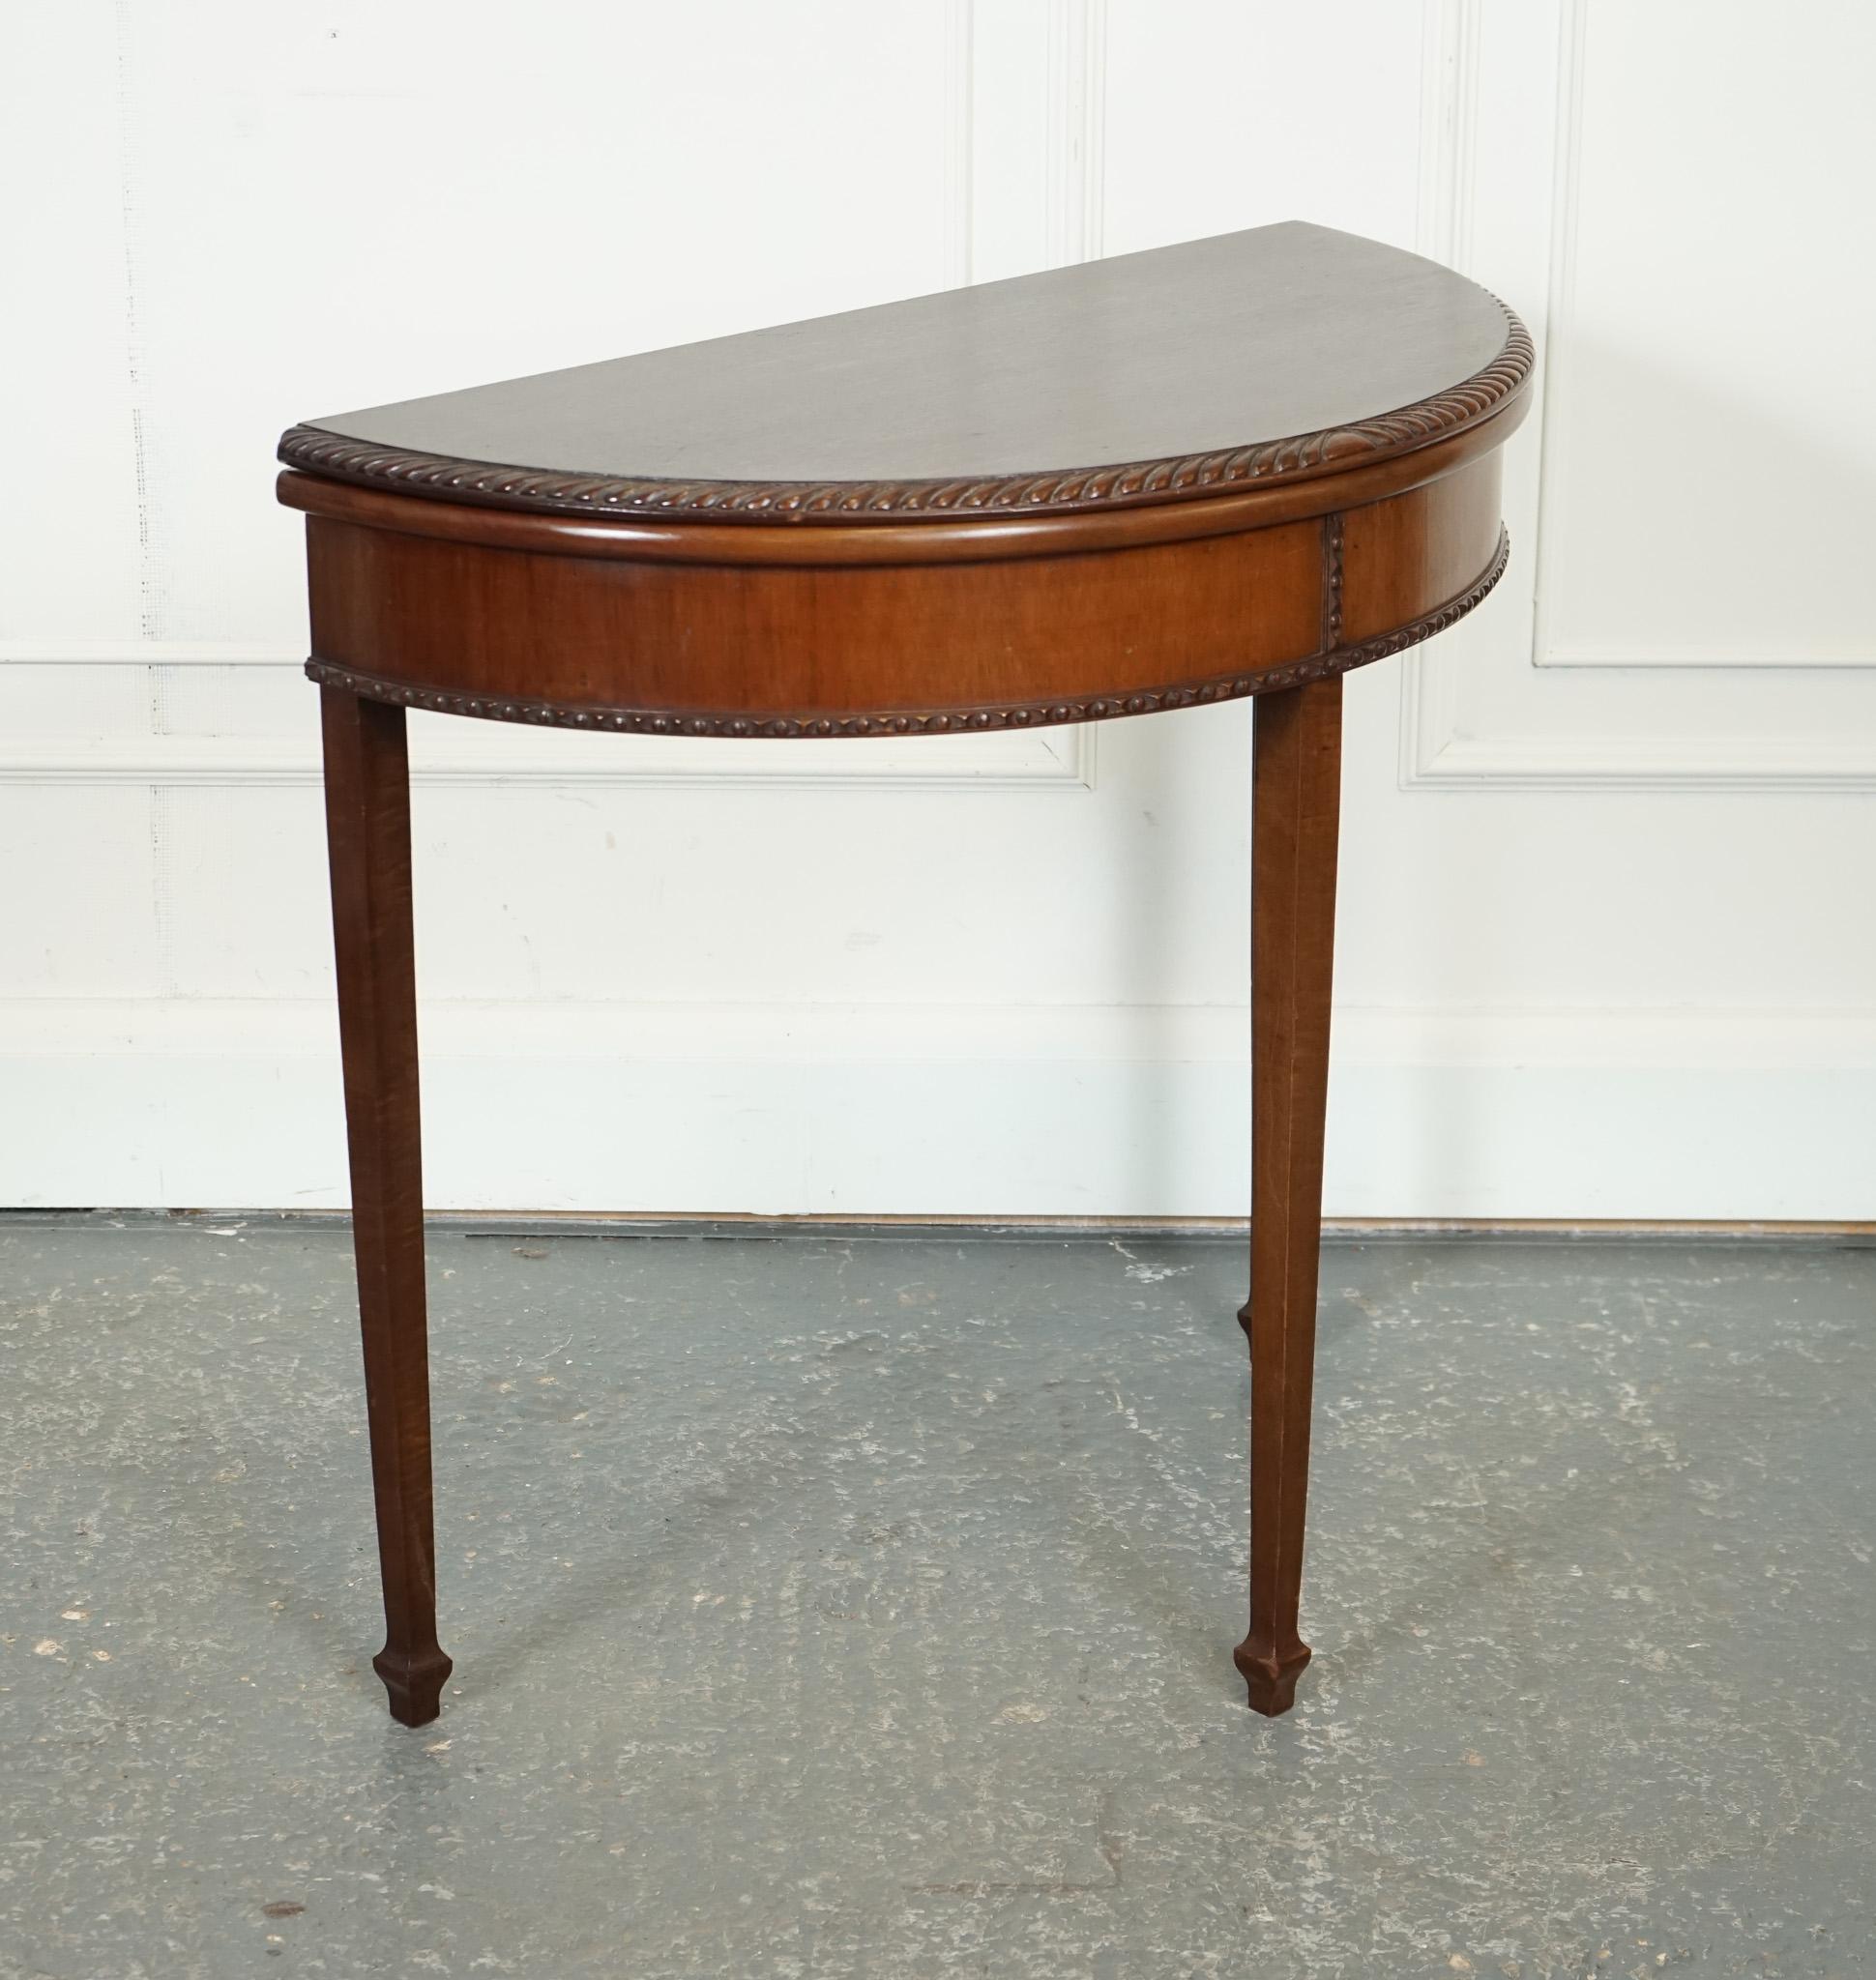 ANTIQUE DEMi LUNE CONSOLE HALL GAMES CARD TABLE J1 im Zustand „Gut“ im Angebot in Pulborough, GB